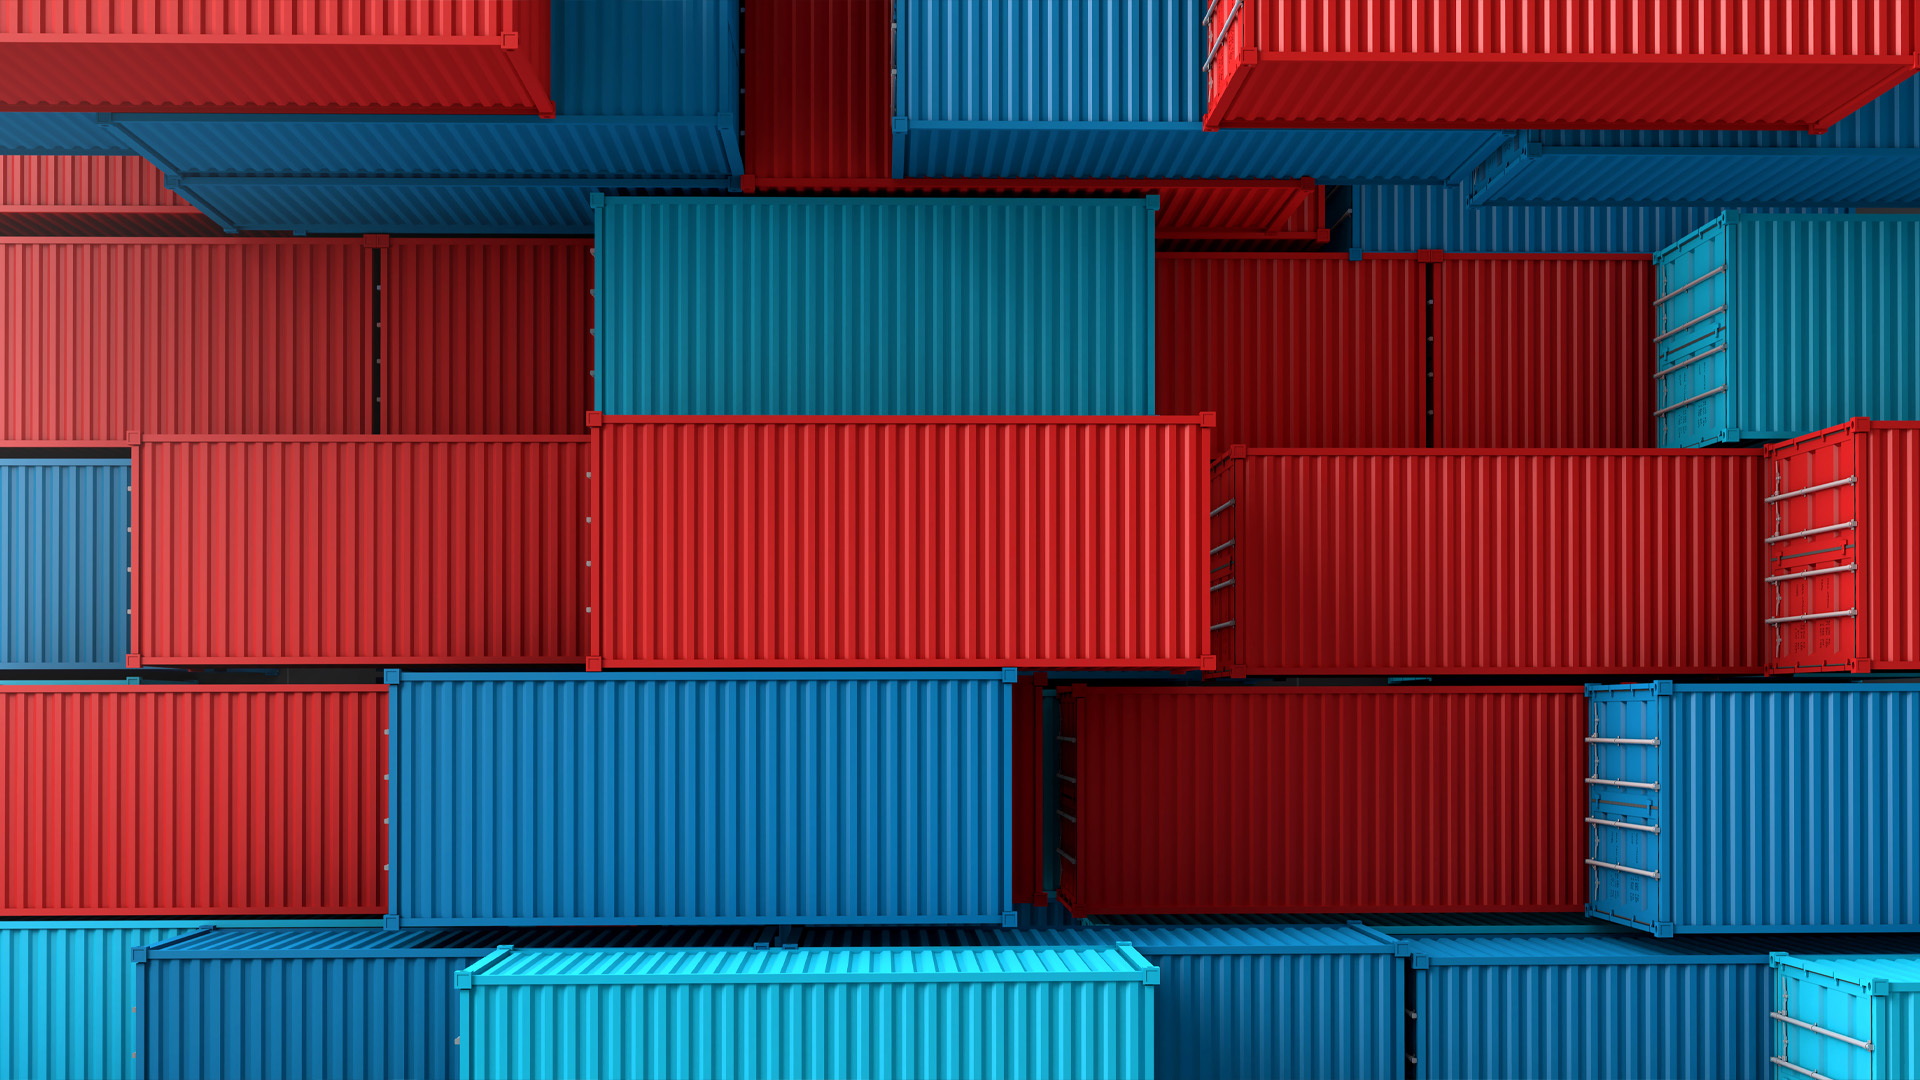 Why should you care about containers